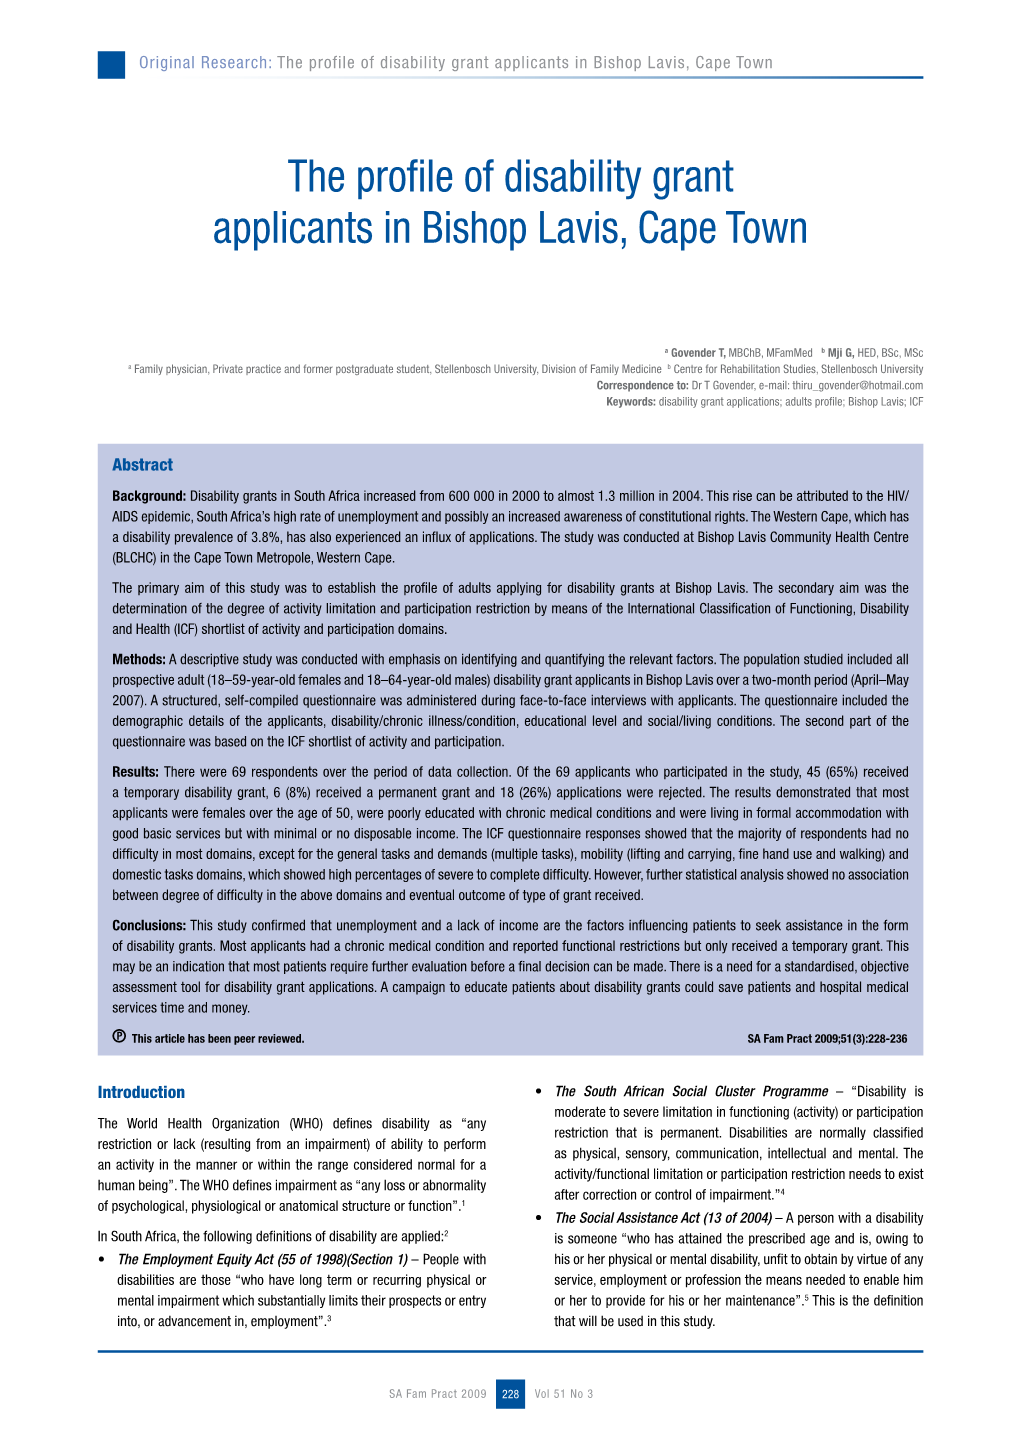 The Profile of Disability Grant Applicants in Bishop Lavis, Cape Town